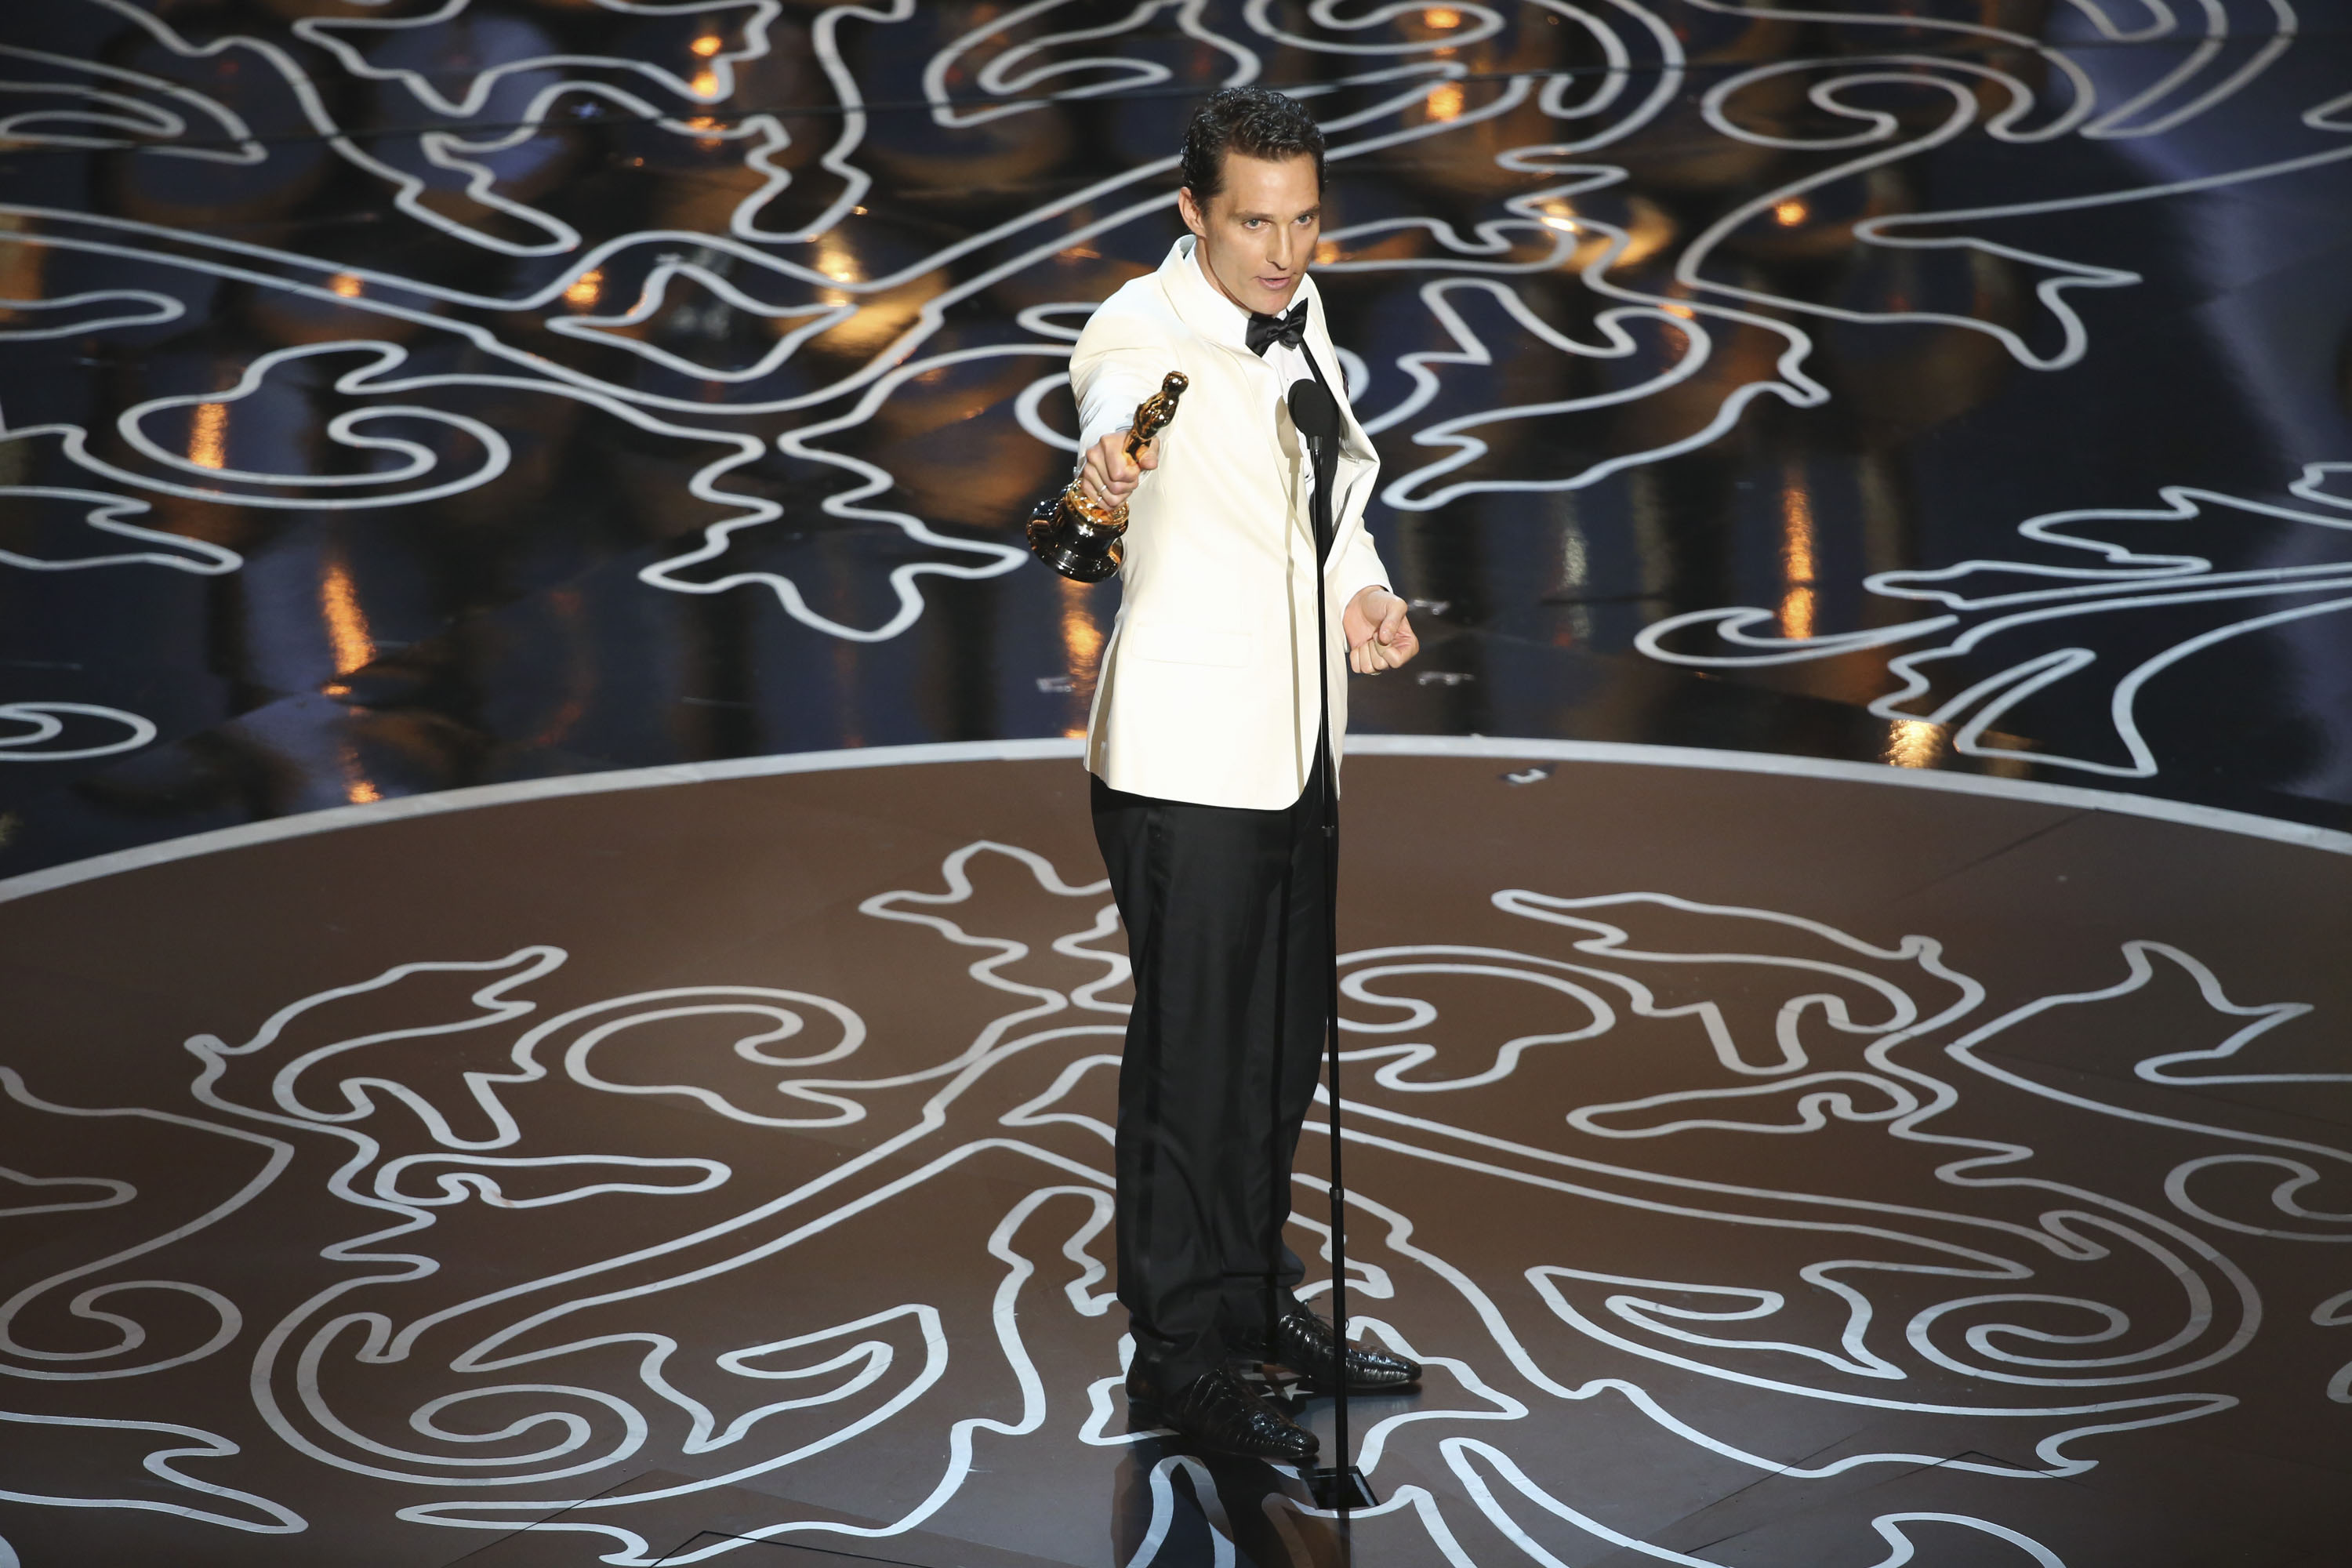 Matthew McConaughey accepts the Best Actor award at the 2014 Oscars